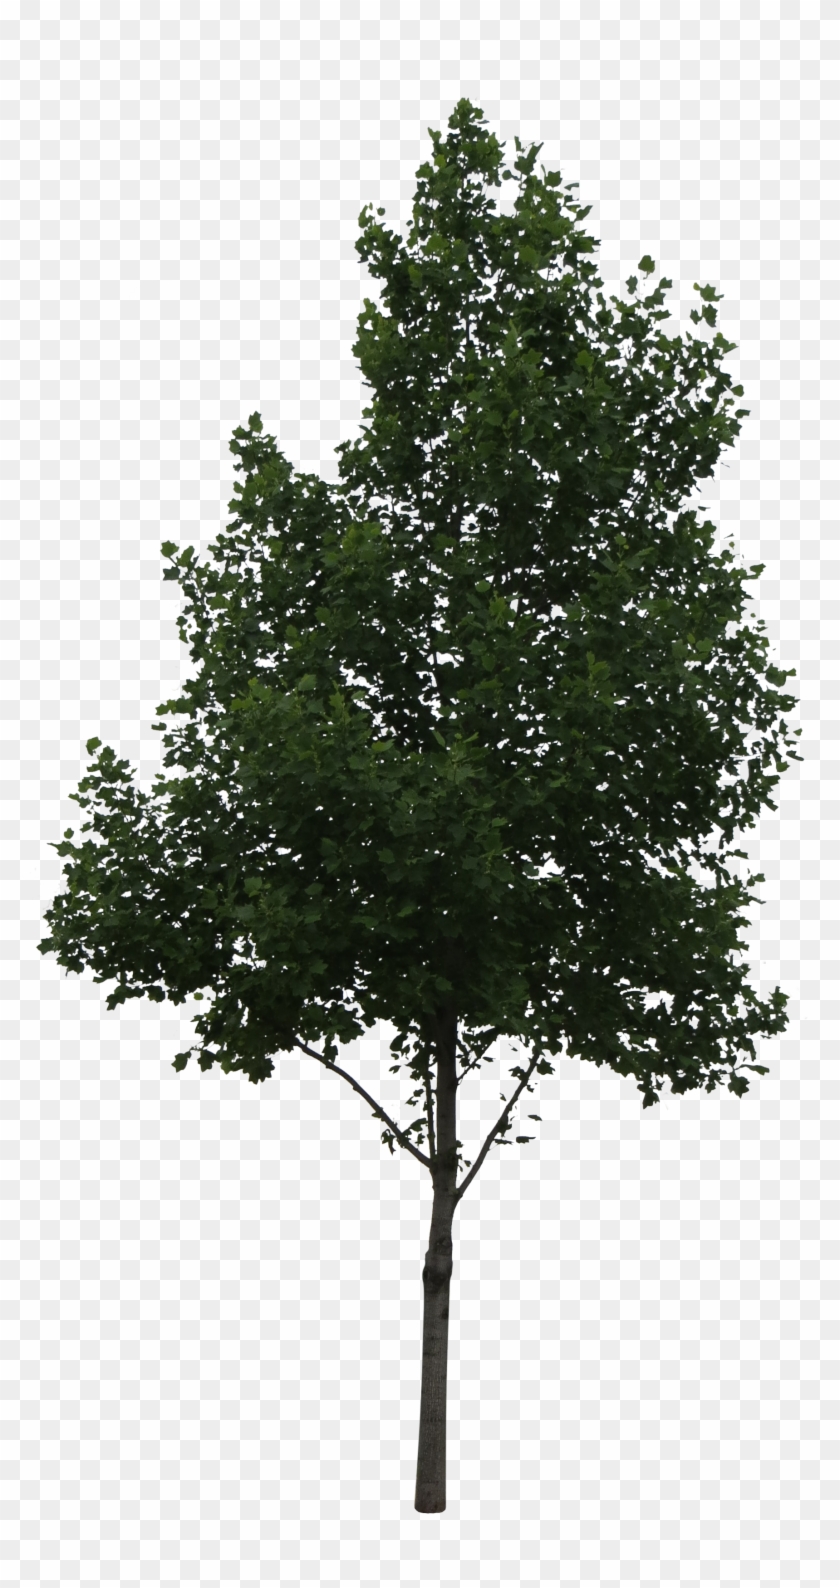 Oak Tree Png - Tree Perspective View Png, Transparent Png - 1763x3250 ...